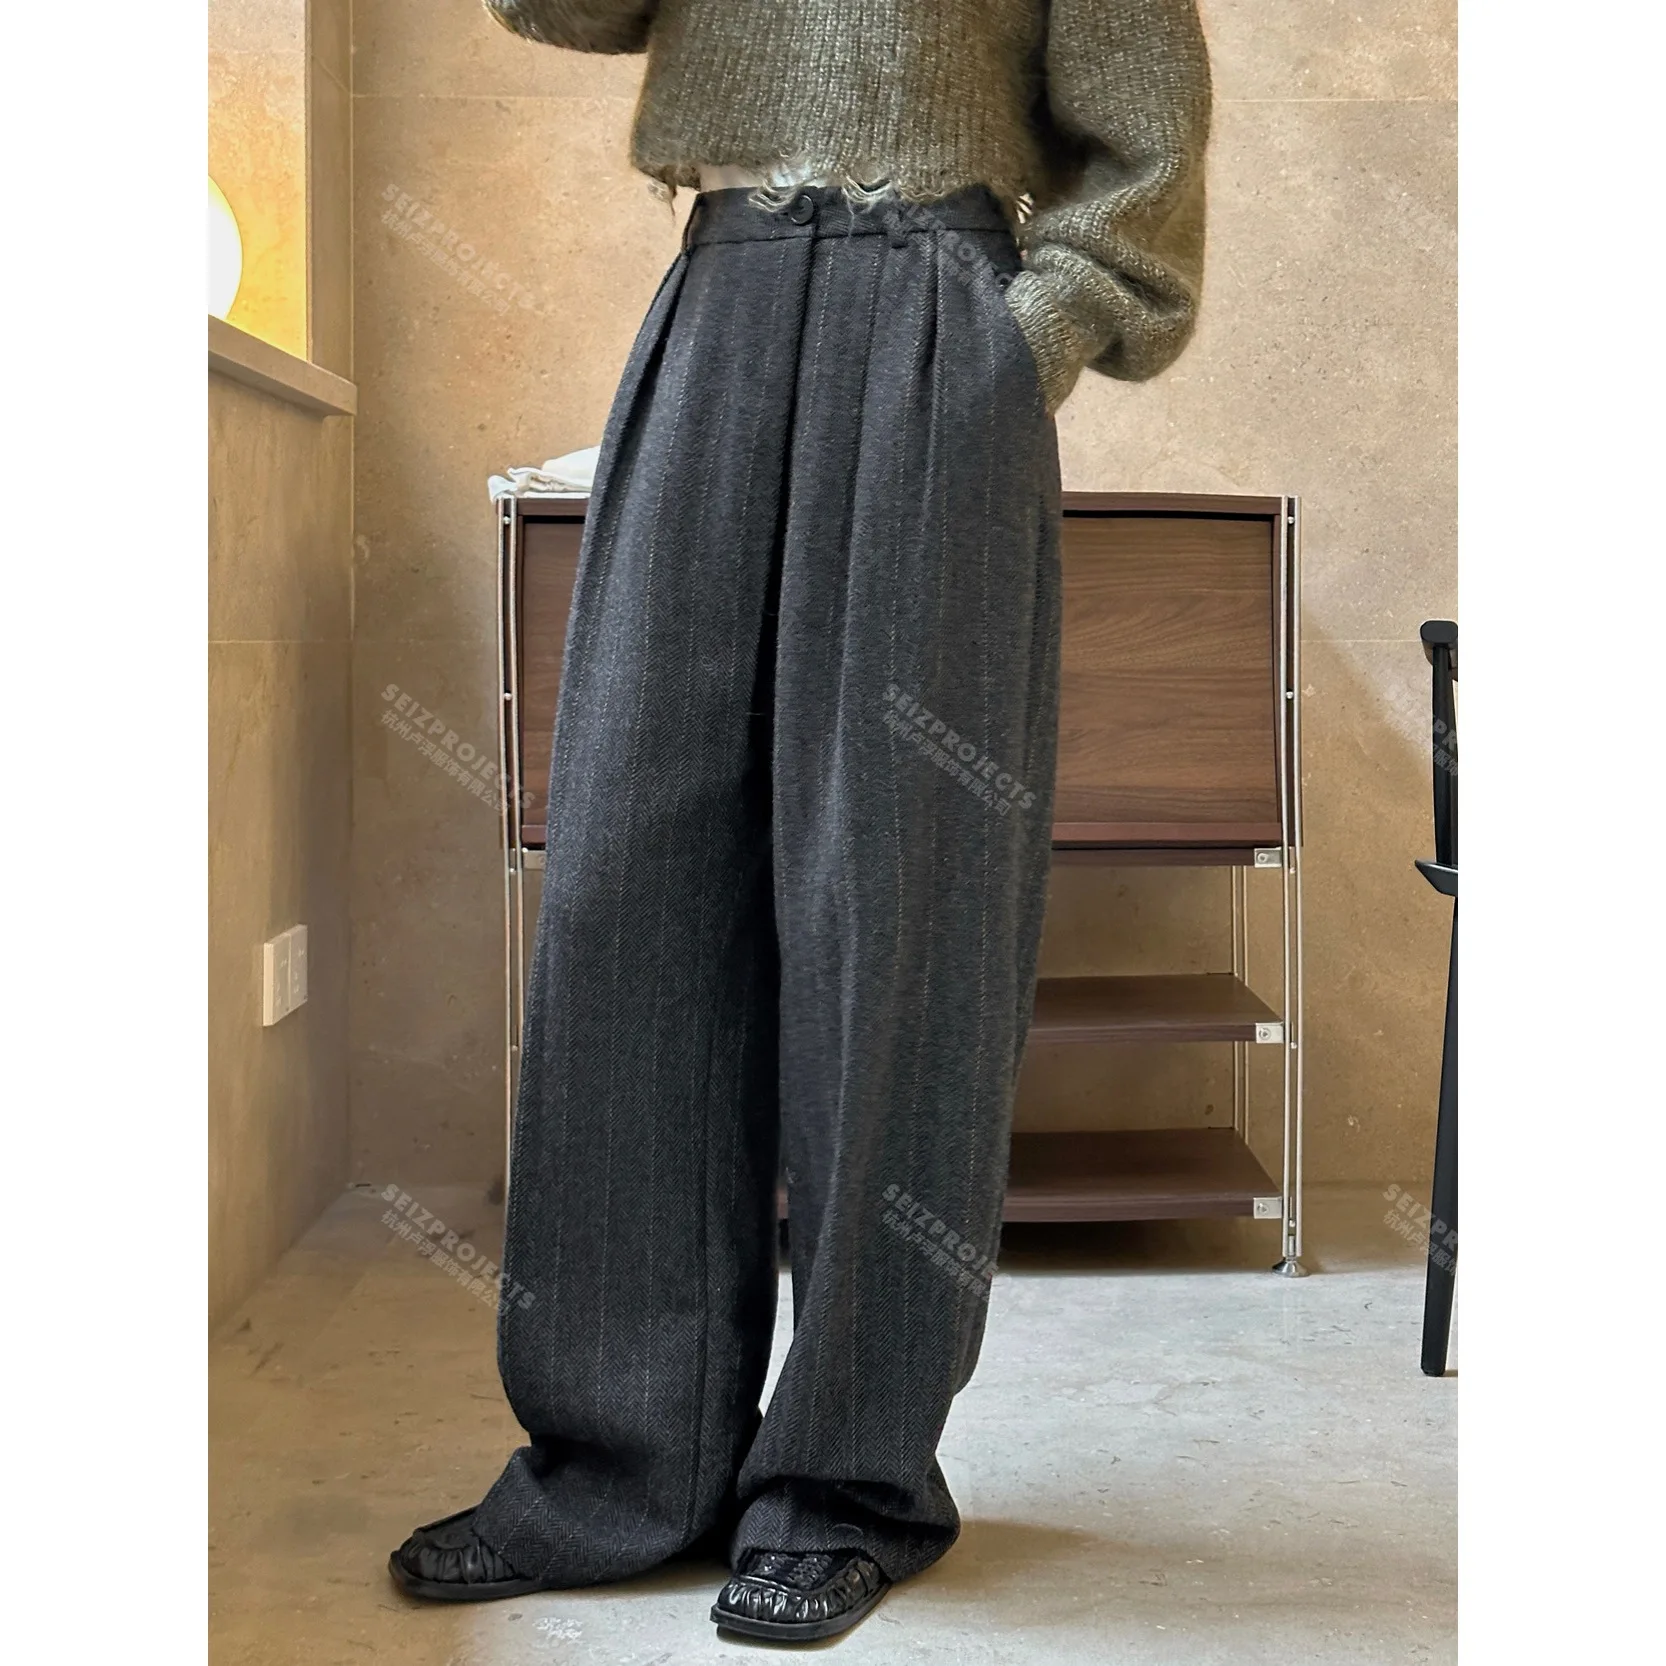 Winter Wide Leg Wool Pants Loose, Warm, And Comfortable Pants For Women -  AliExpress